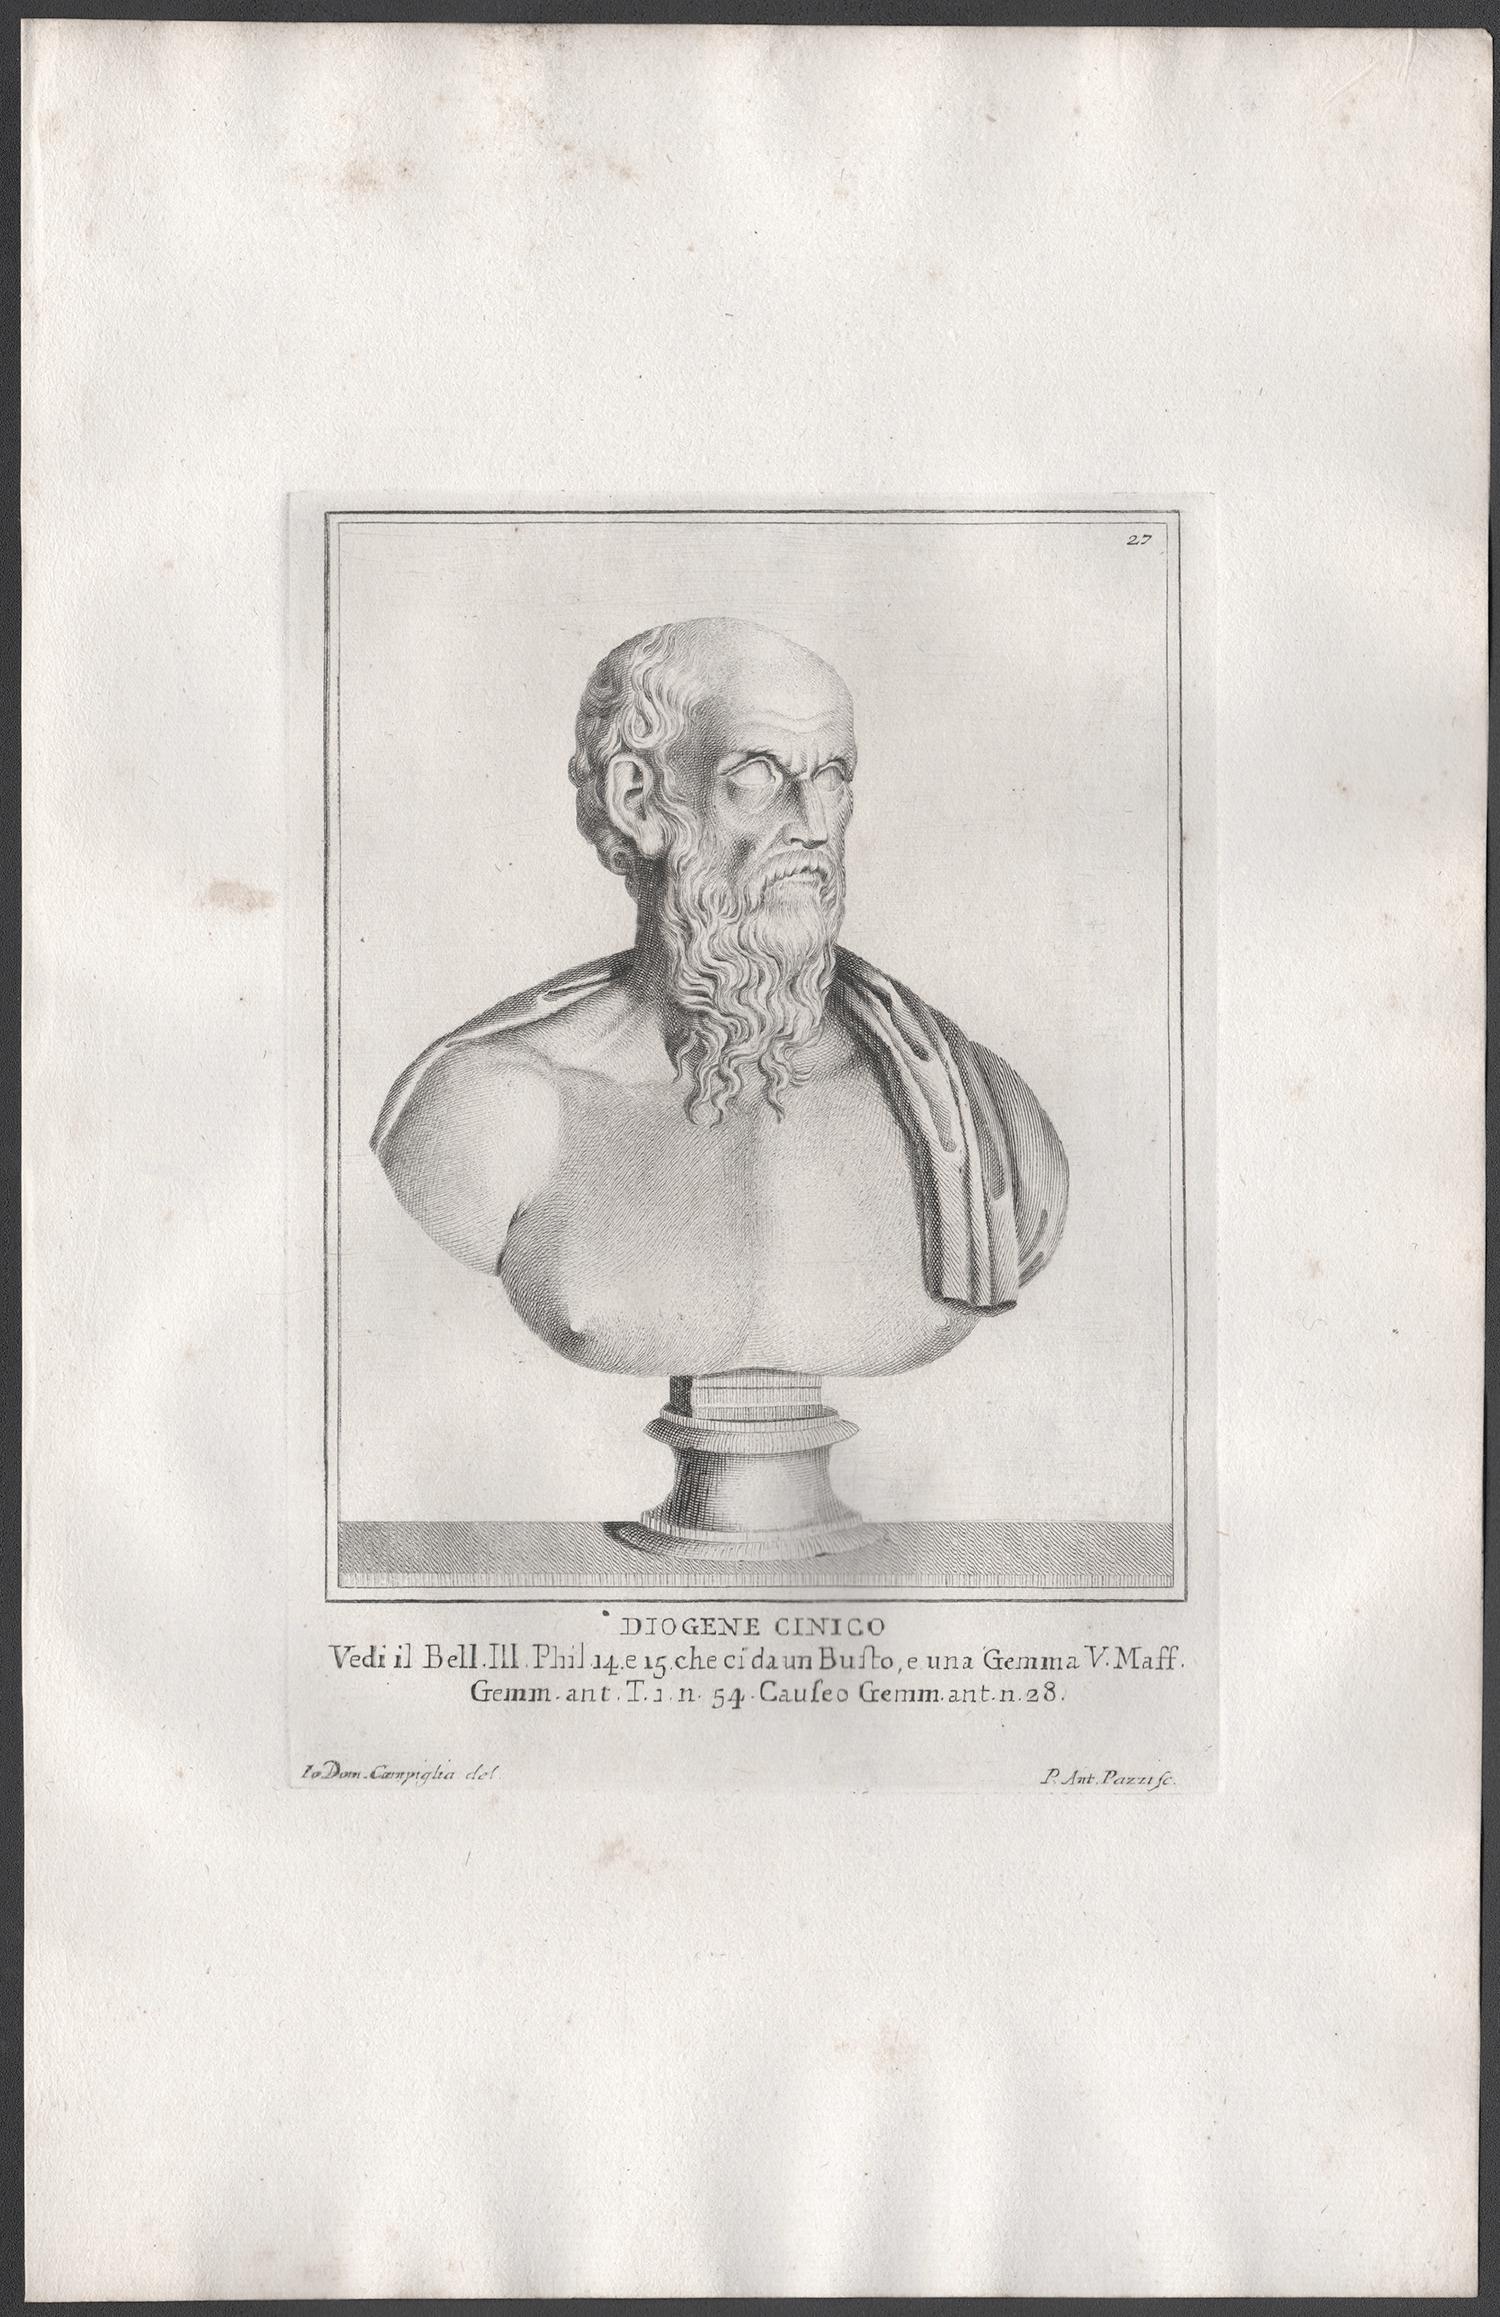 Diogenes the Cynic, Greek philosopher. C18th Grand Tour Roman bust engraving - Print by Pazzi after Giovanni Domenico Campiglia